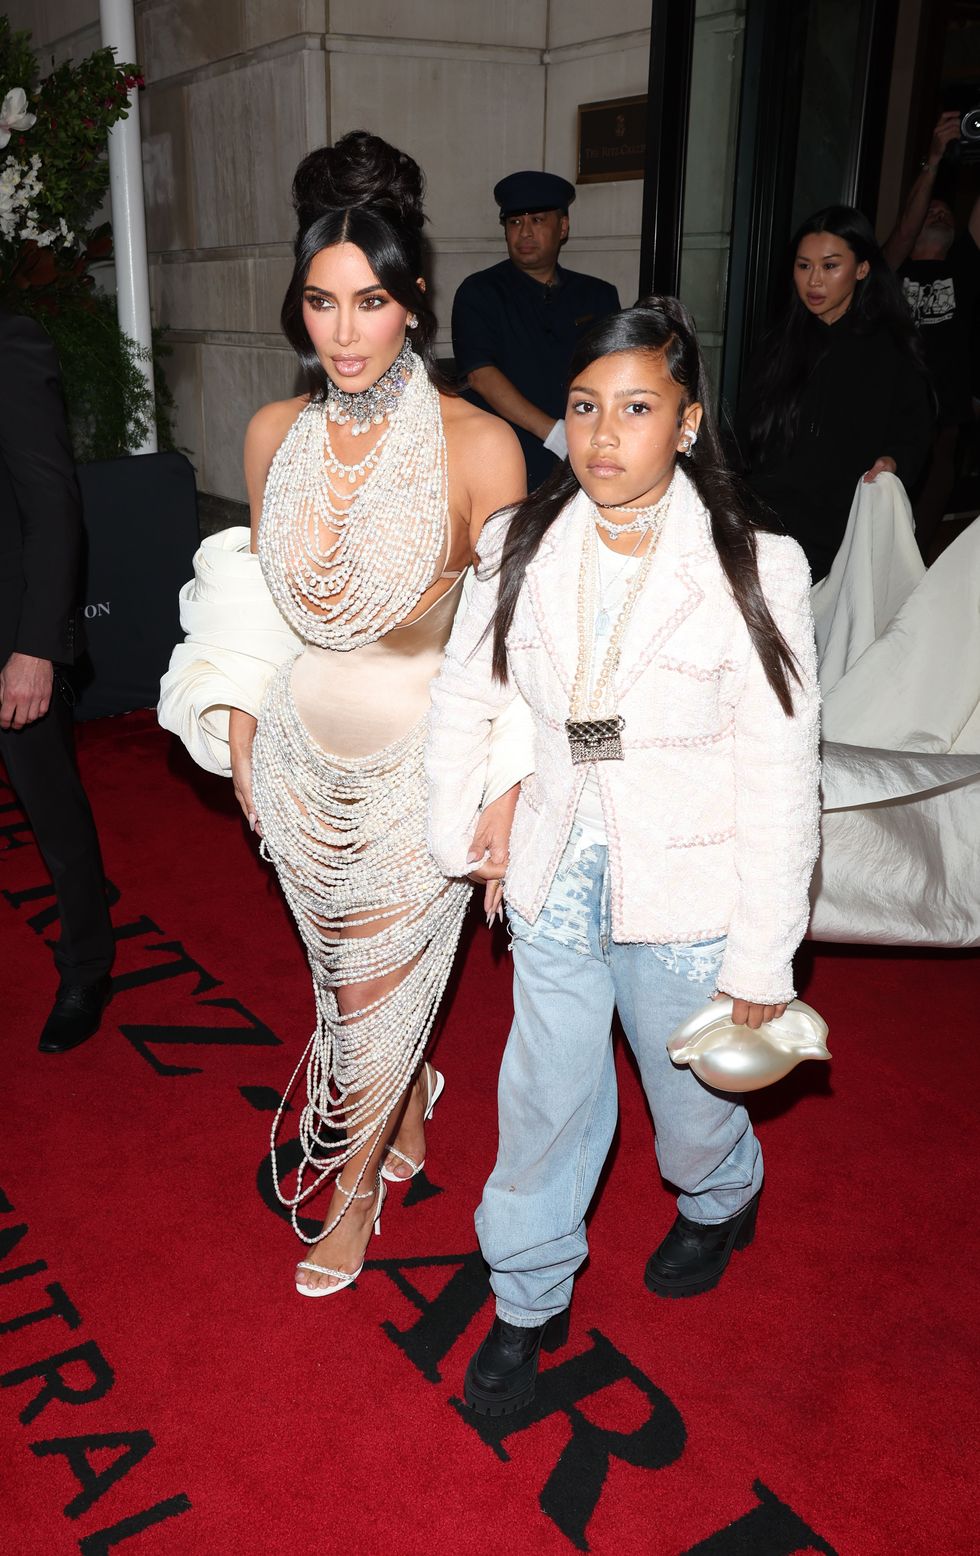 Kim Kardashian Wore a Dress Made Entirely of Pearls to the 2023 Met Gala